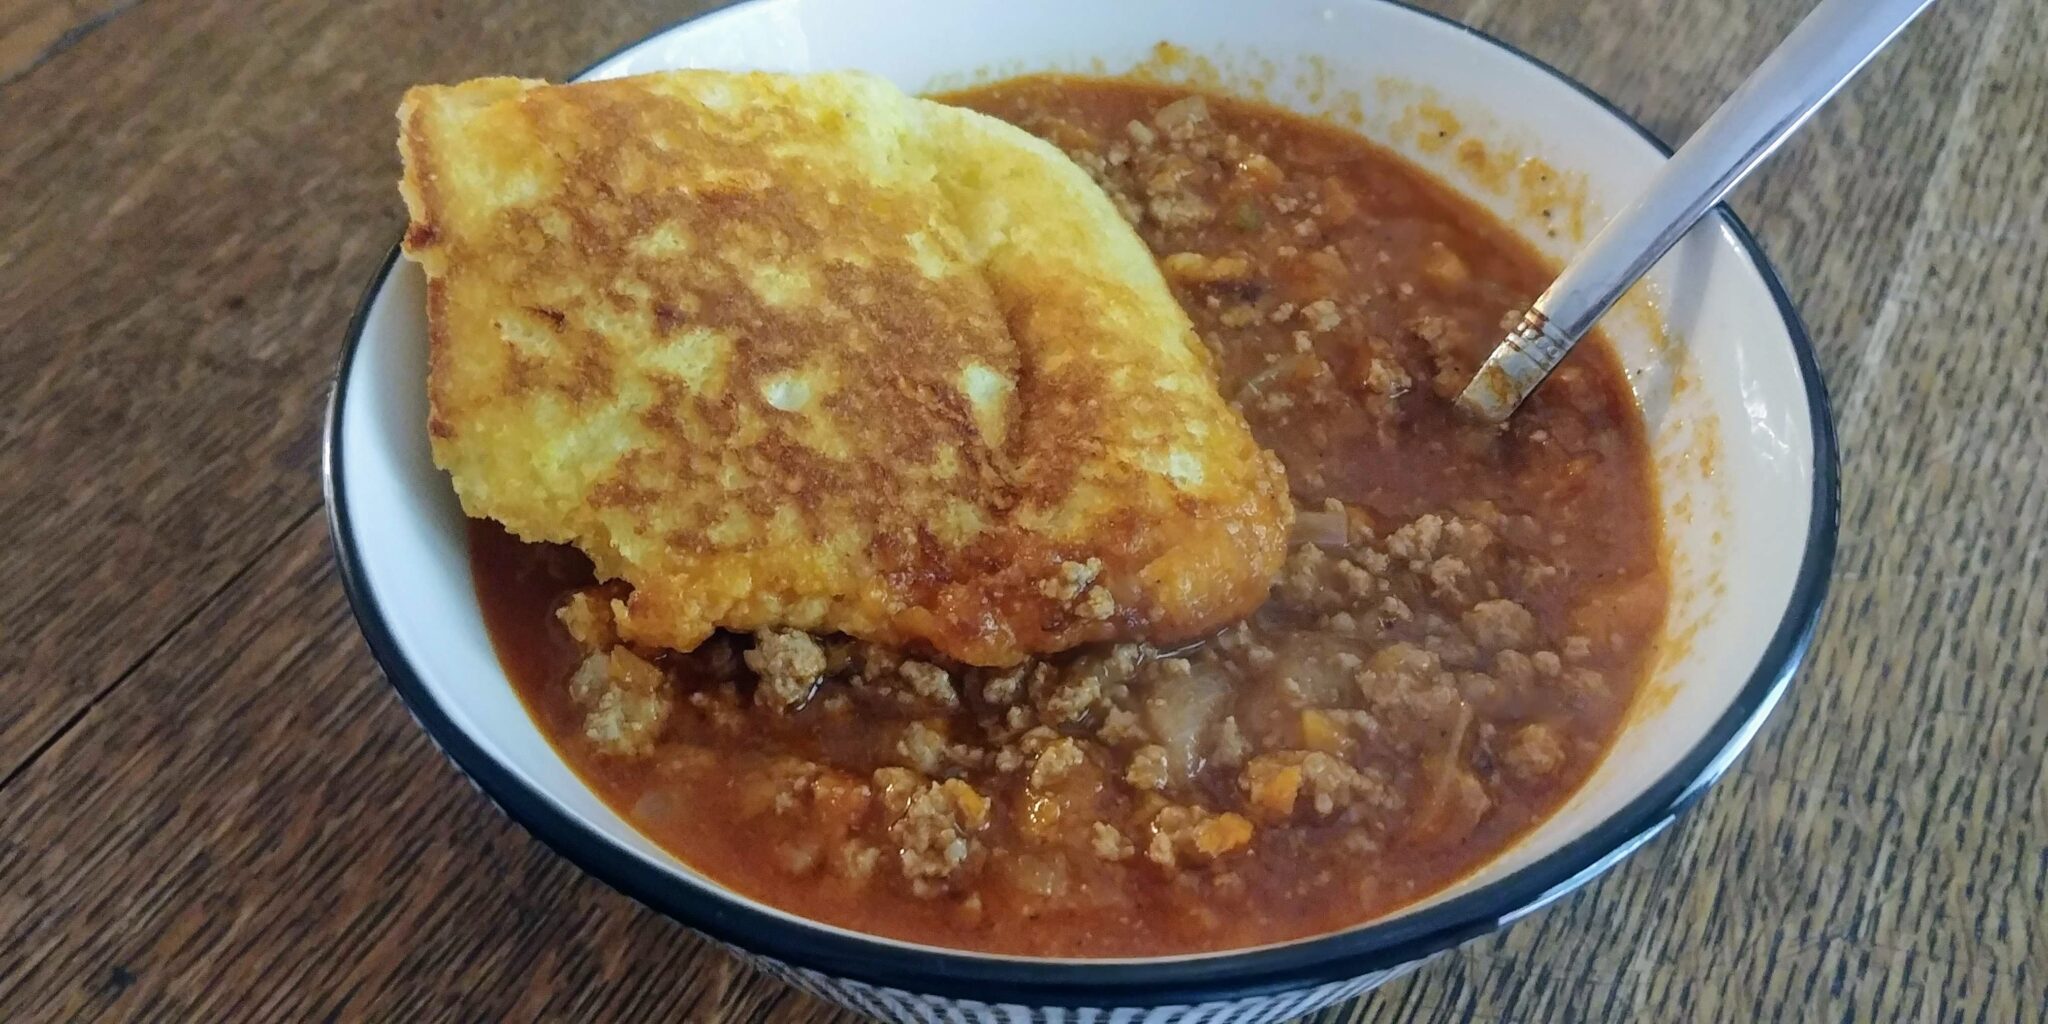 https://thekitchenwench.com/wp-content/uploads/2023/01/Turkey-Chili-complete-in-bowl-with-corn-muffin-topper-scaled.jpg